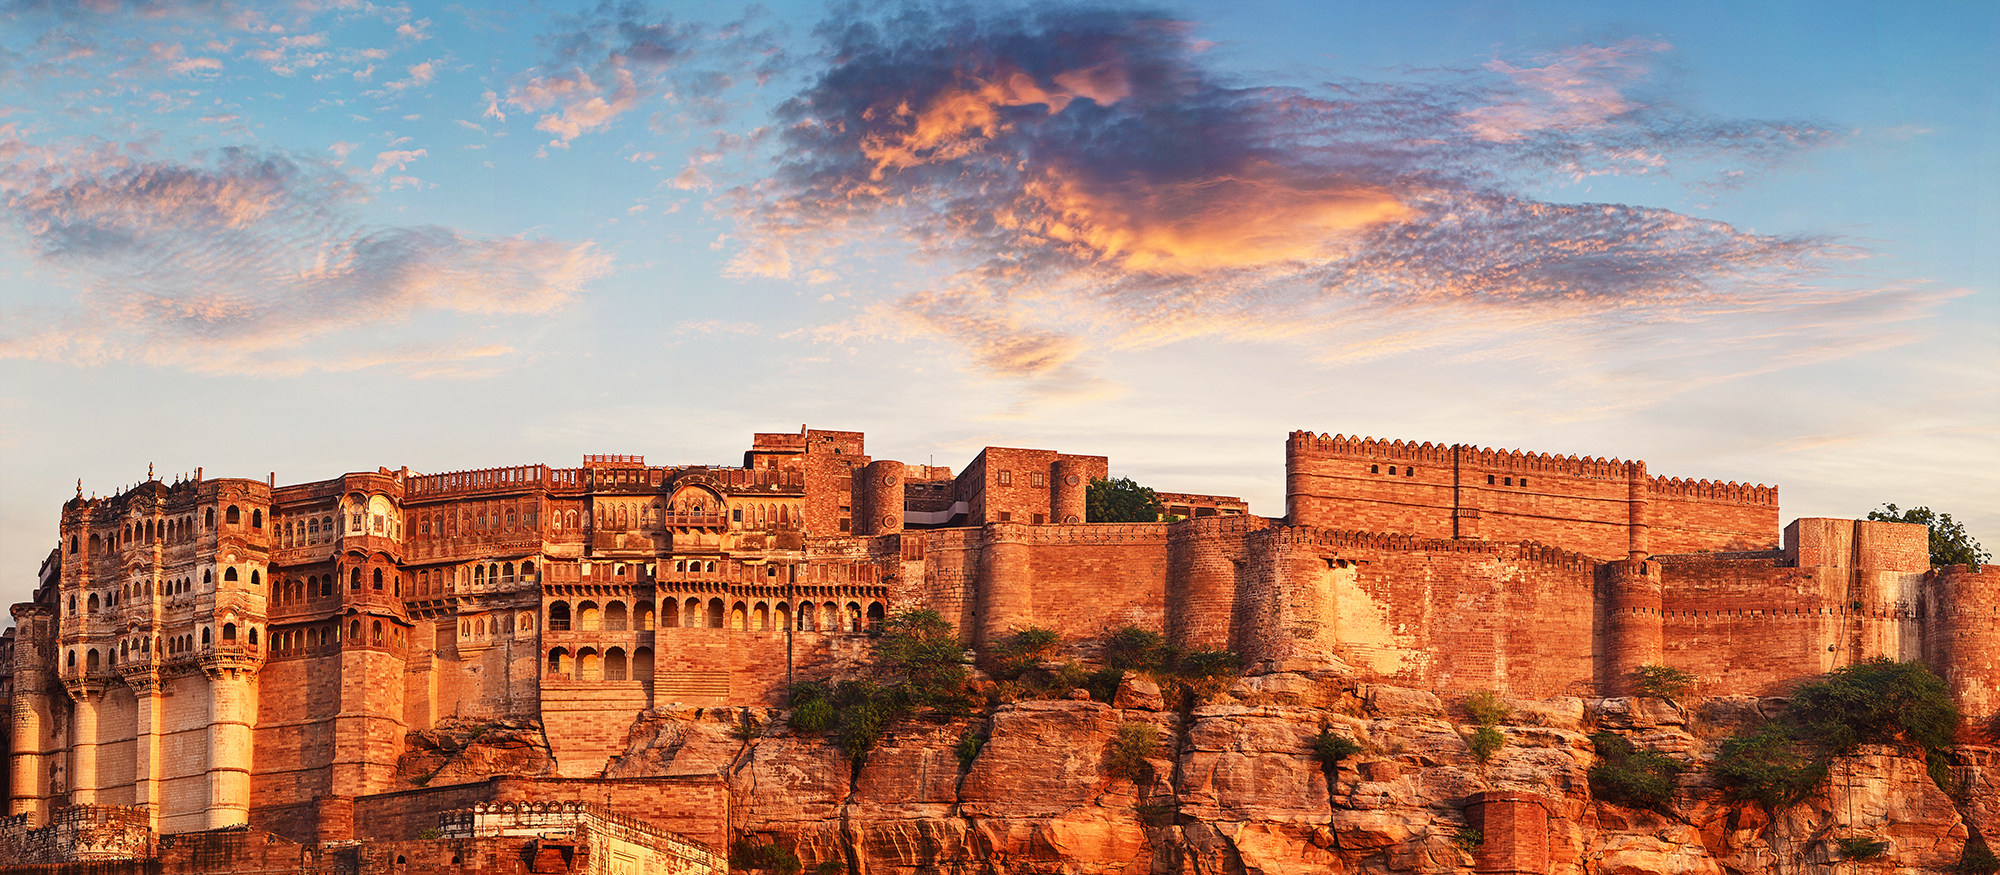 Get To Enjoy The Best Trip of The Year By Visiting Go Rajasthan Travel